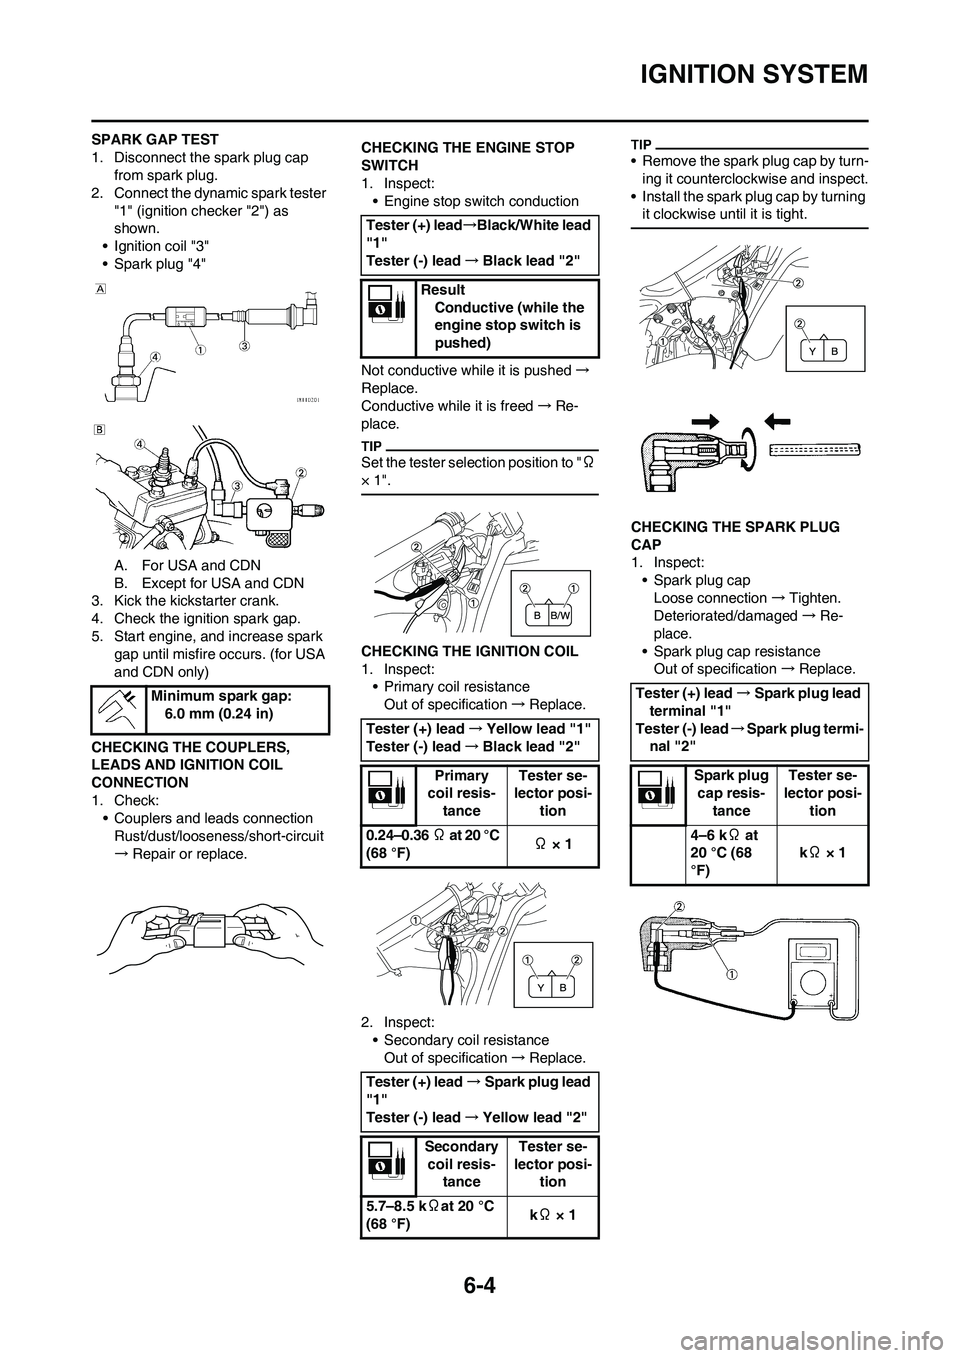 YAMAHA YZ125LC 2010  Owners Manual 6-4
IGNITION SYSTEM
SPARK GAP TEST
1. Disconnect the spark plug cap 
from spark plug.
2. Connect the dynamic spark tester 
"1" (ignition checker "2") as 
shown.
• Ignition coil "3"
• Spark plug "4